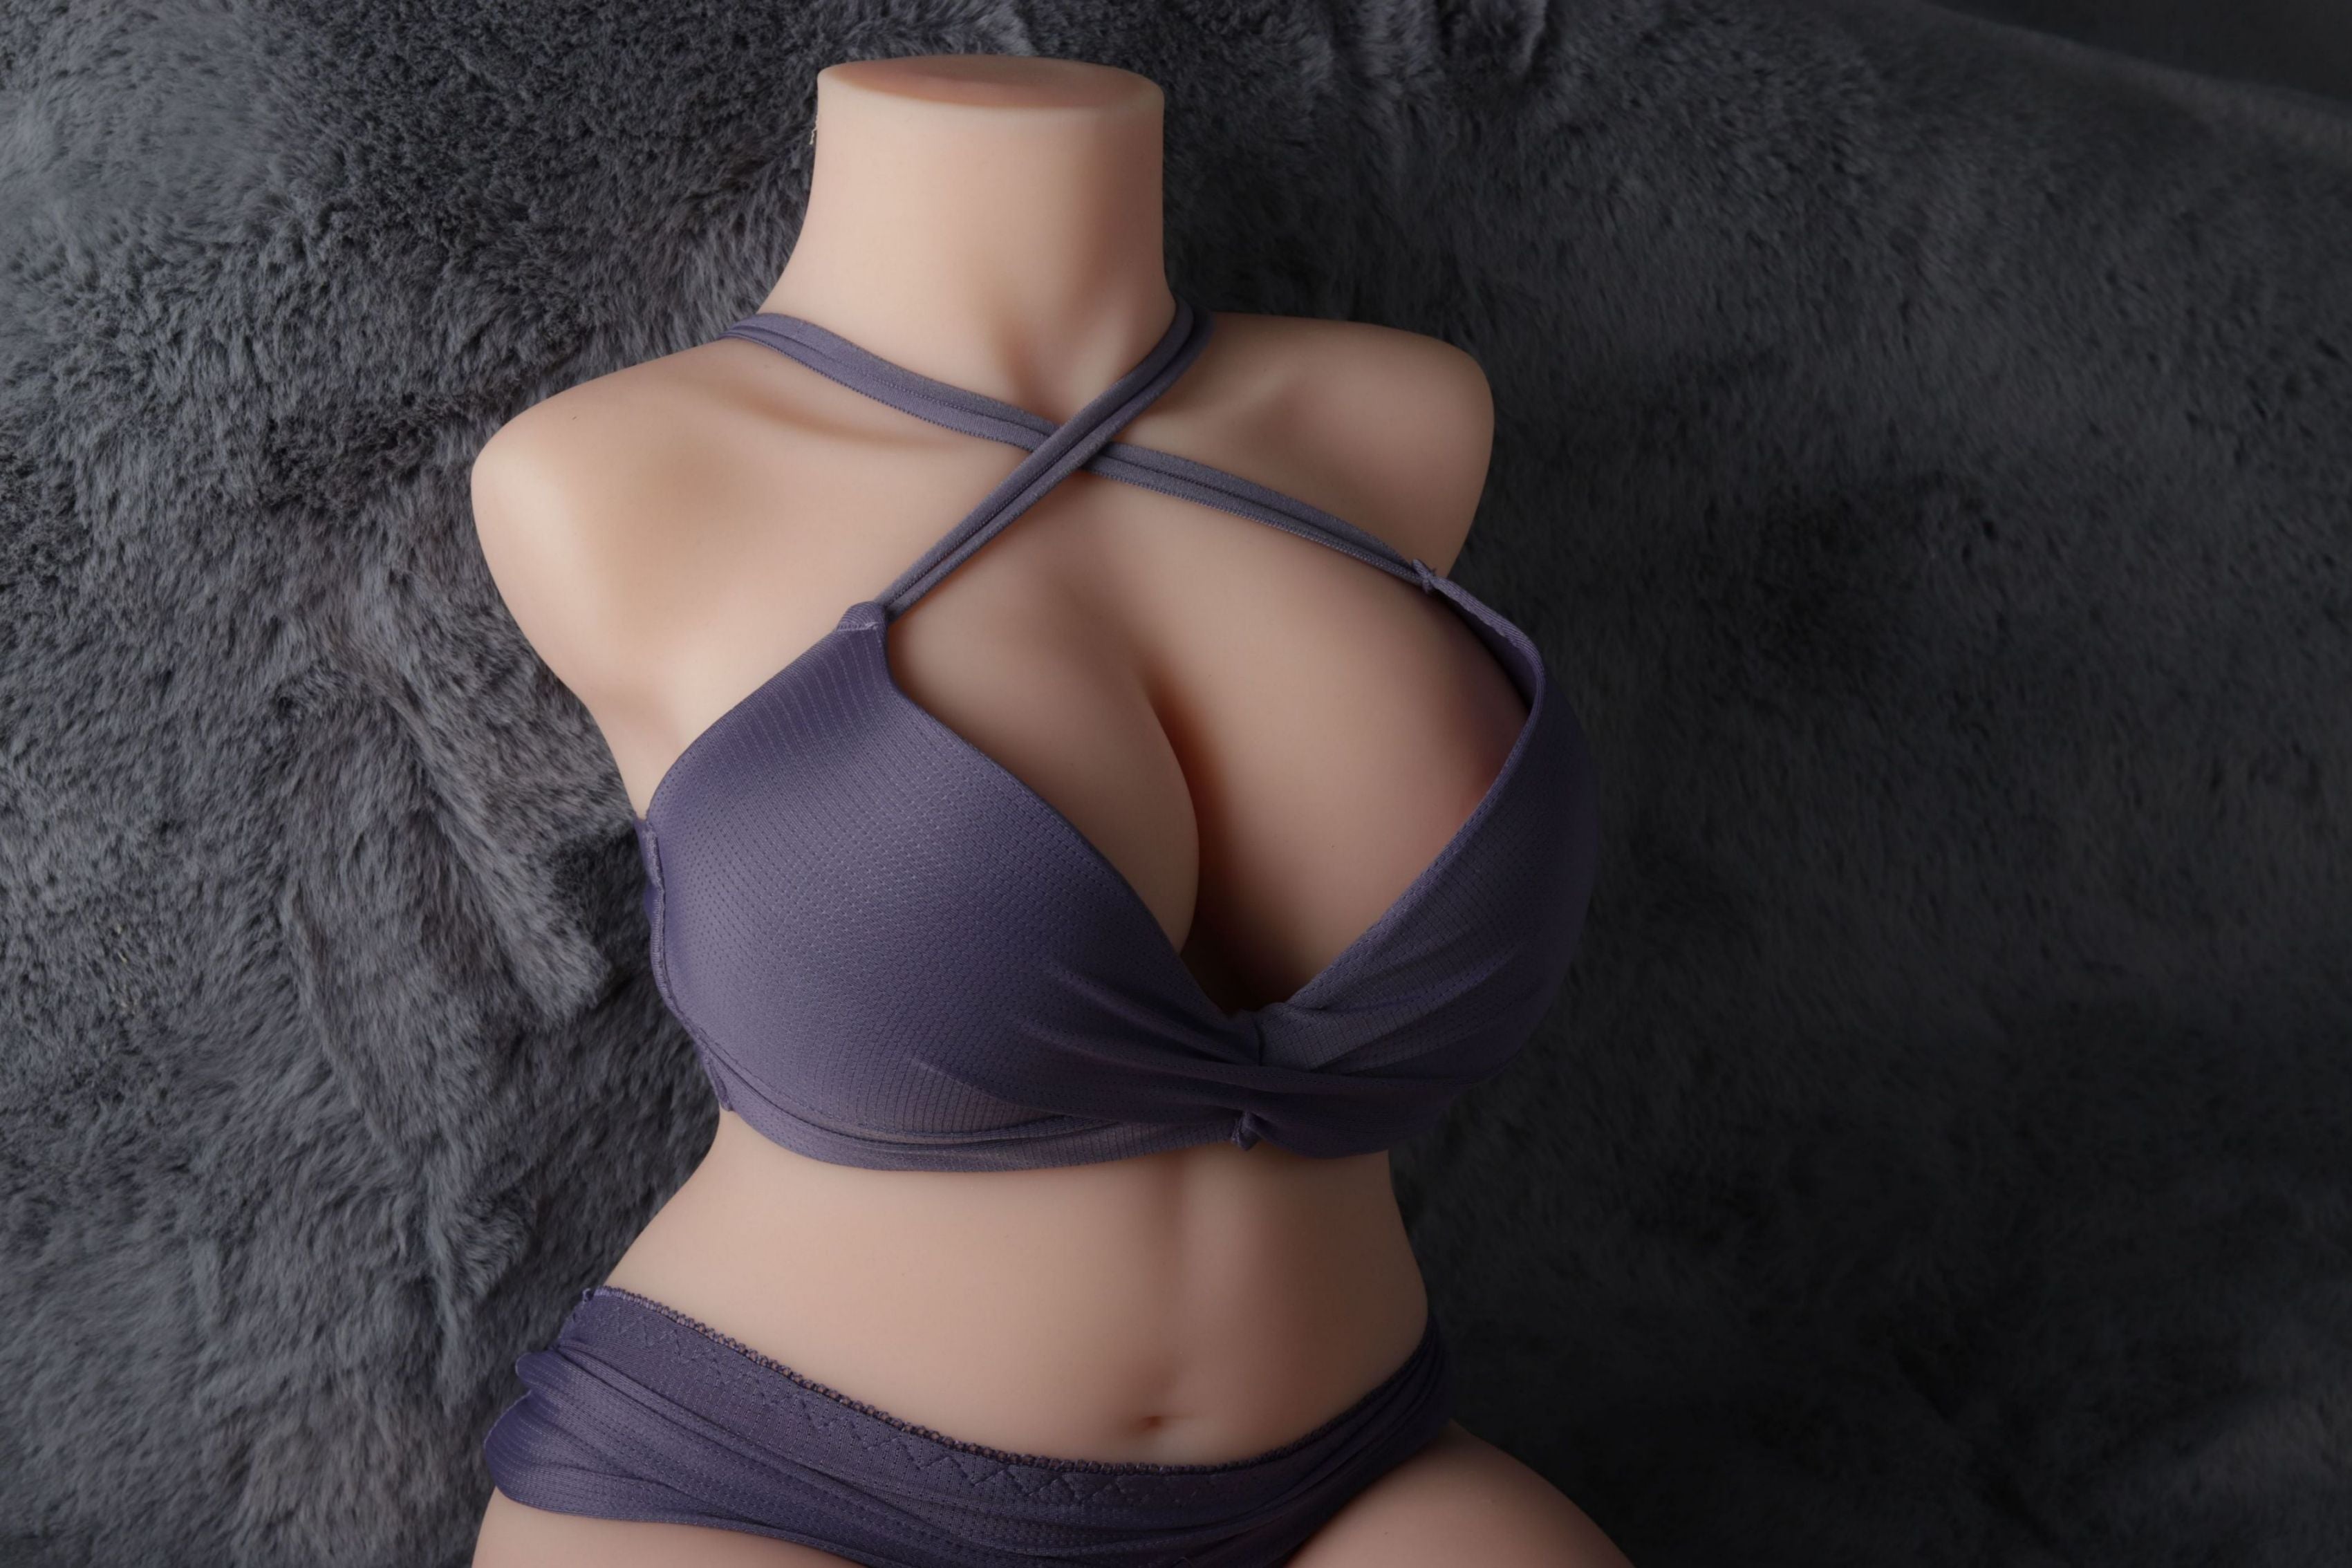 Jennifer (18.7LB)Plump Mature Sex Doll with Huge Breastand Sexy Booty